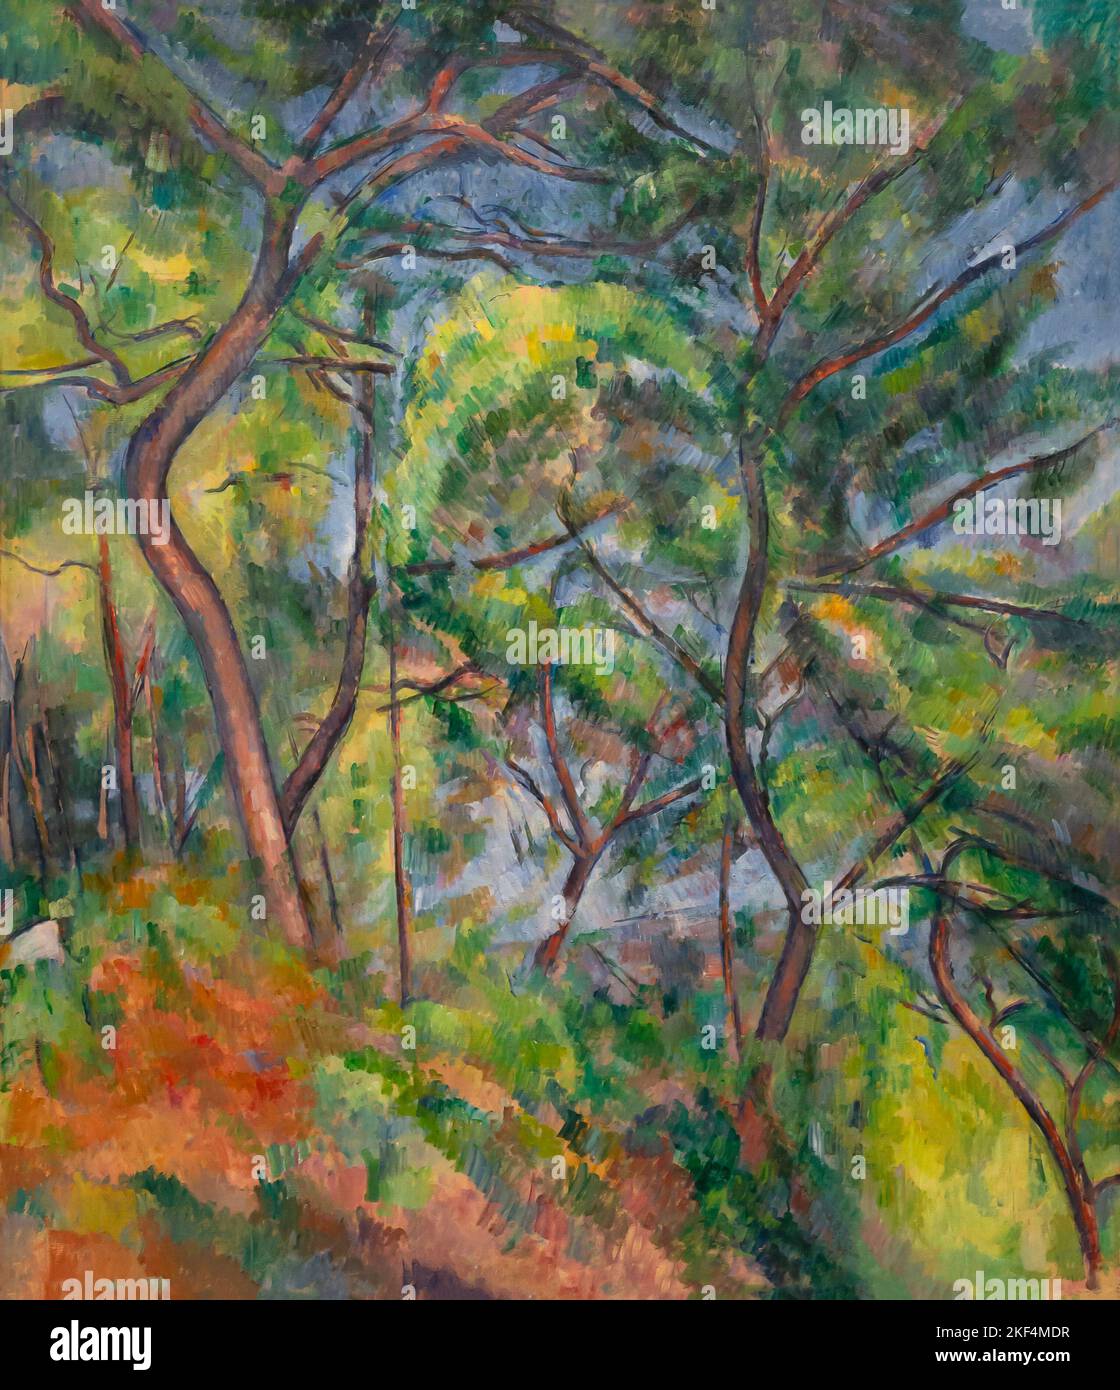 Forest Floor, Sous-Bois, Paul Cezanne, circa 1894, Los Angeles County Museum of Art, California, USA Foto Stock